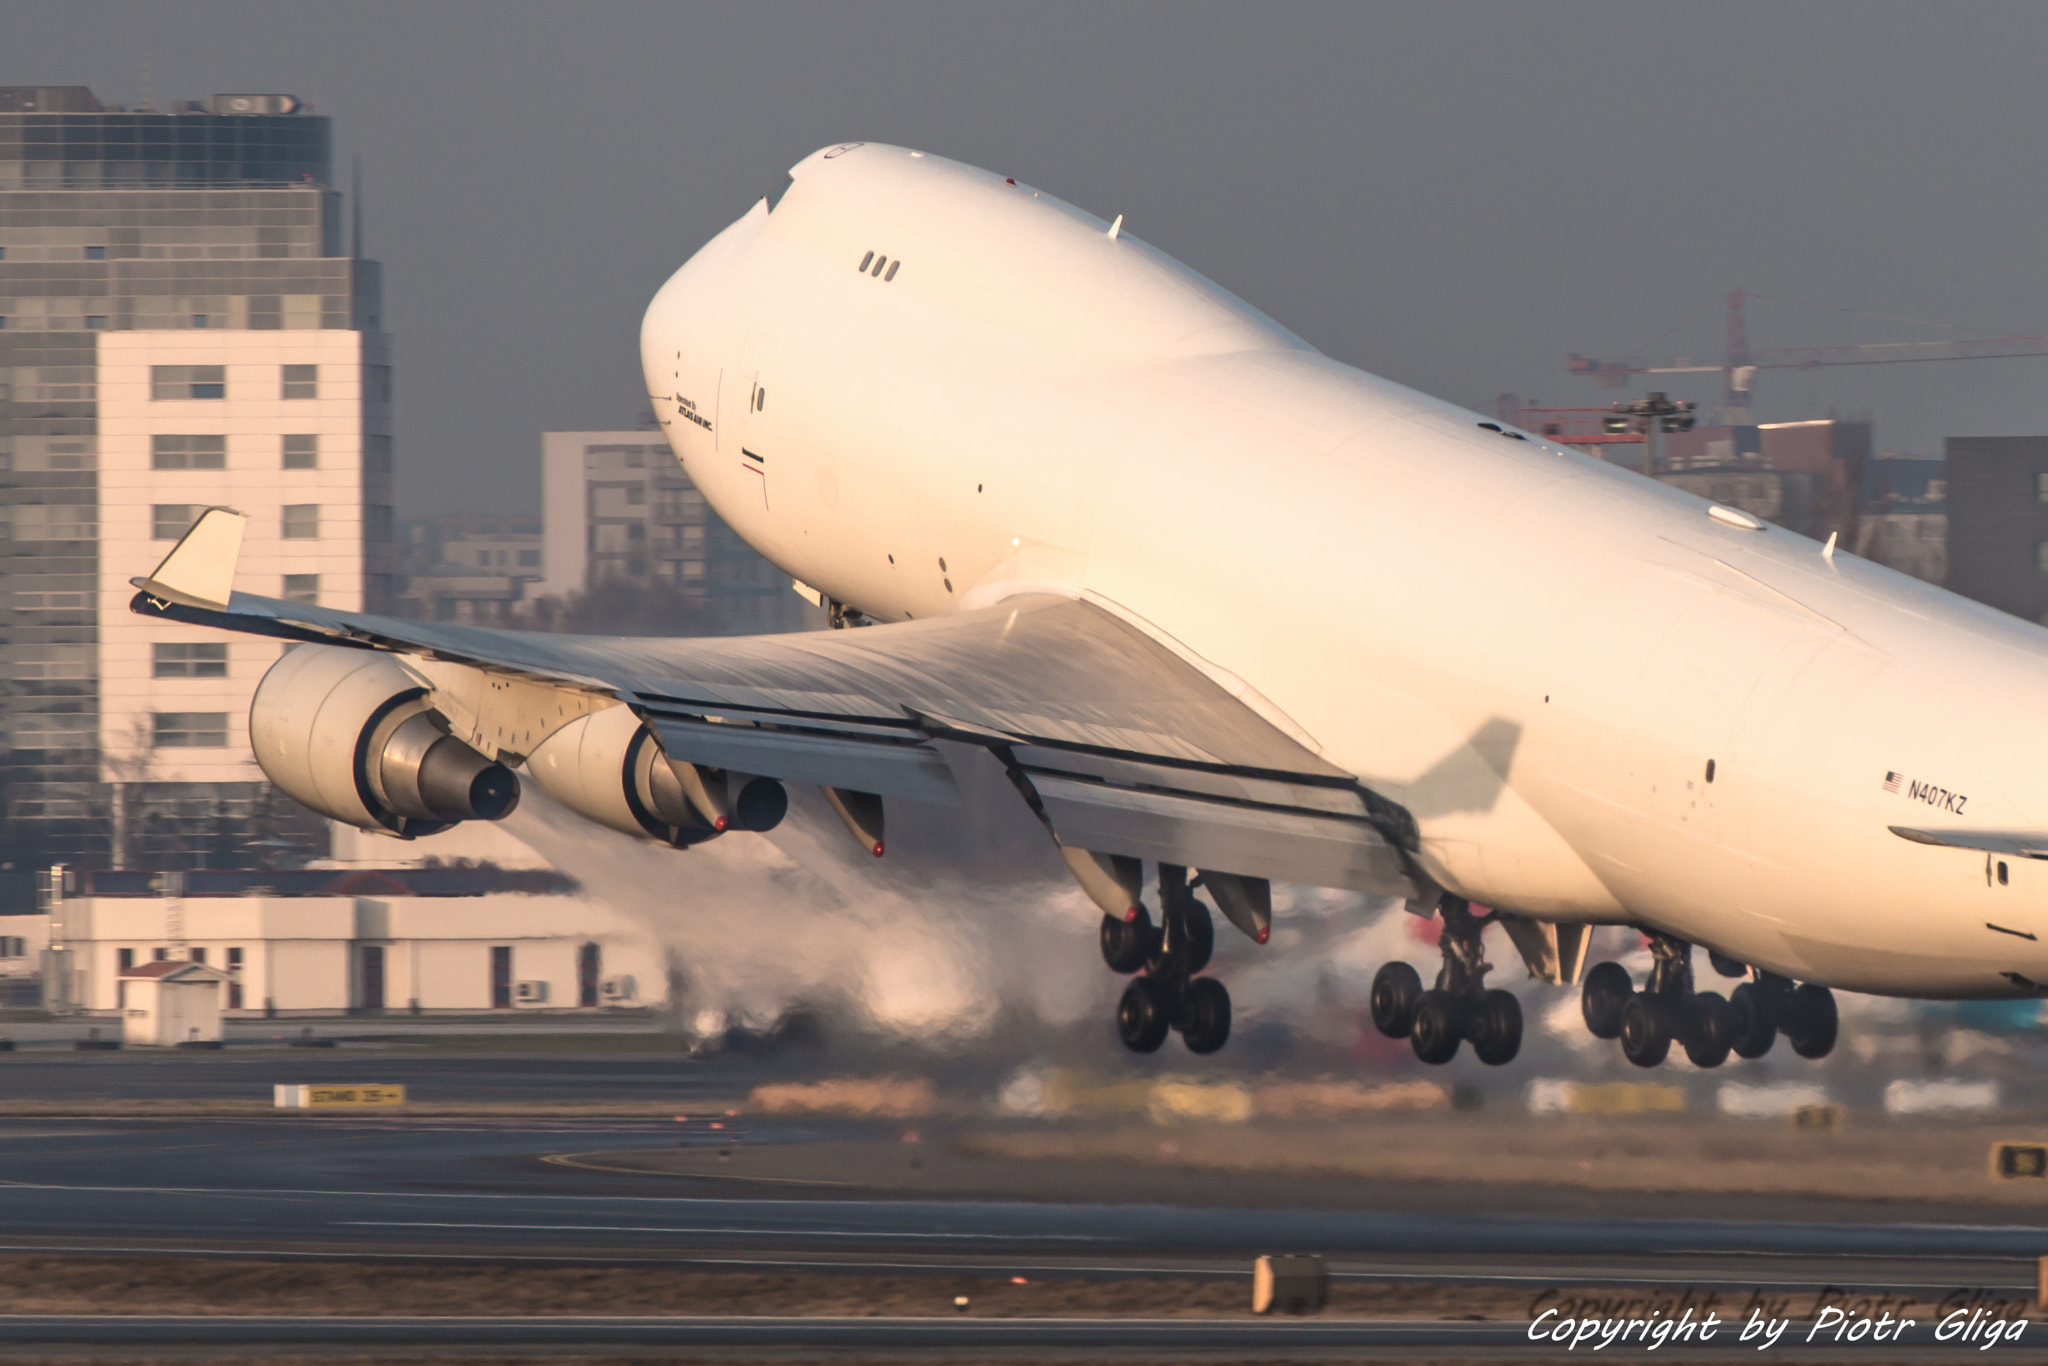 Sony a99 II + Tamron SP 150-600mm F5-6.3 Di VC USD sample photo. Boeing 747-400 photography